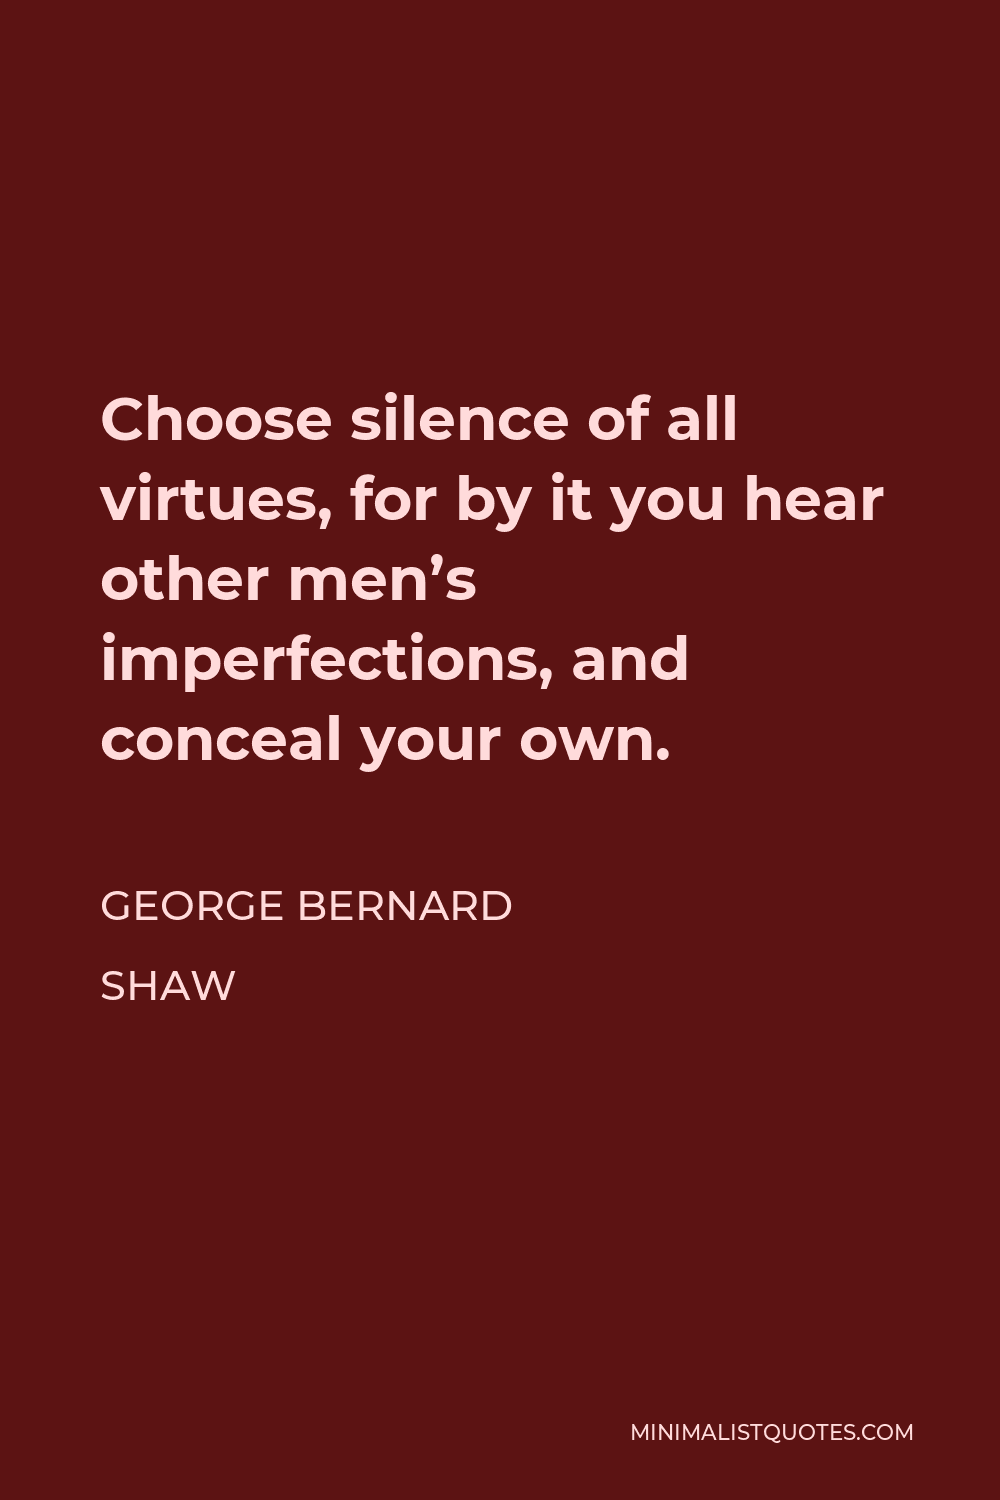 George Bernard Shaw Quote - Choose silence of all virtues, for by it you hear other men’s imperfections, and conceal your own.